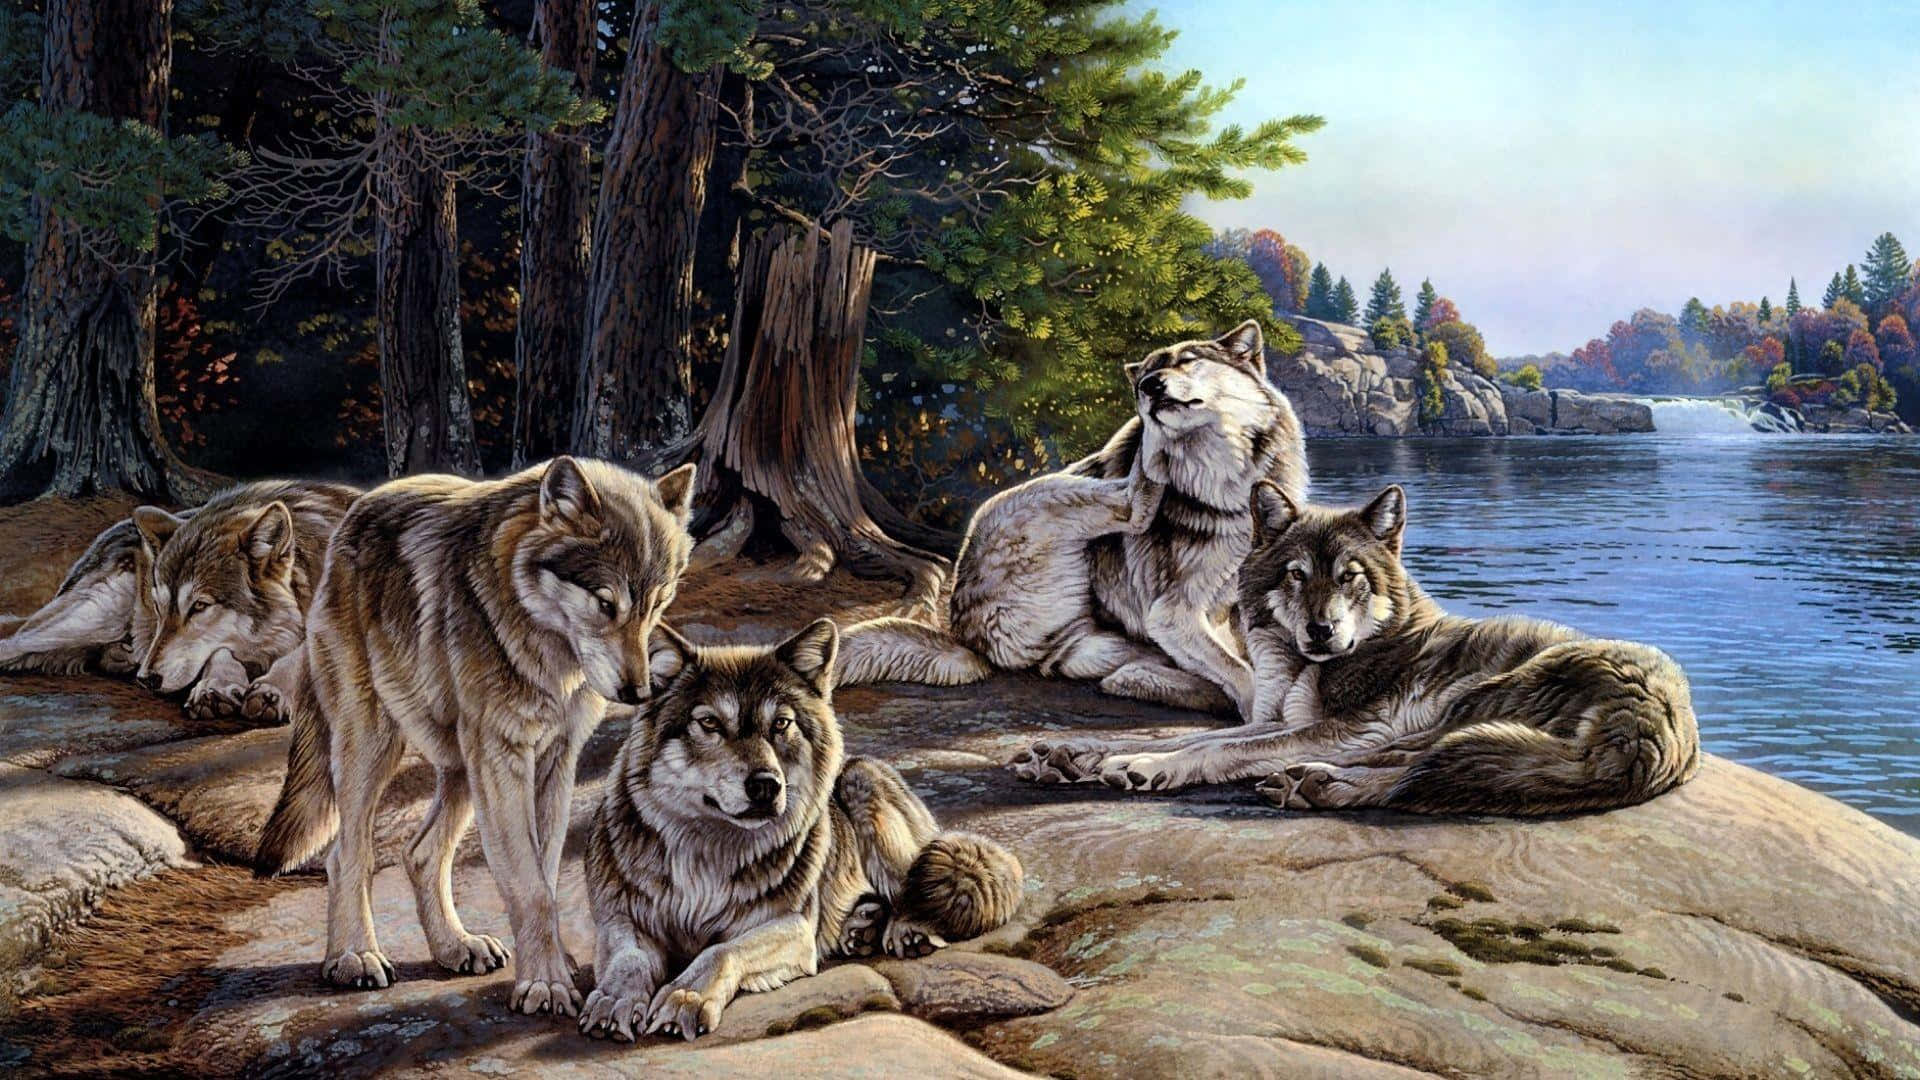 A perfect pair of cute wolves taking a break in a wooded setting Wallpaper